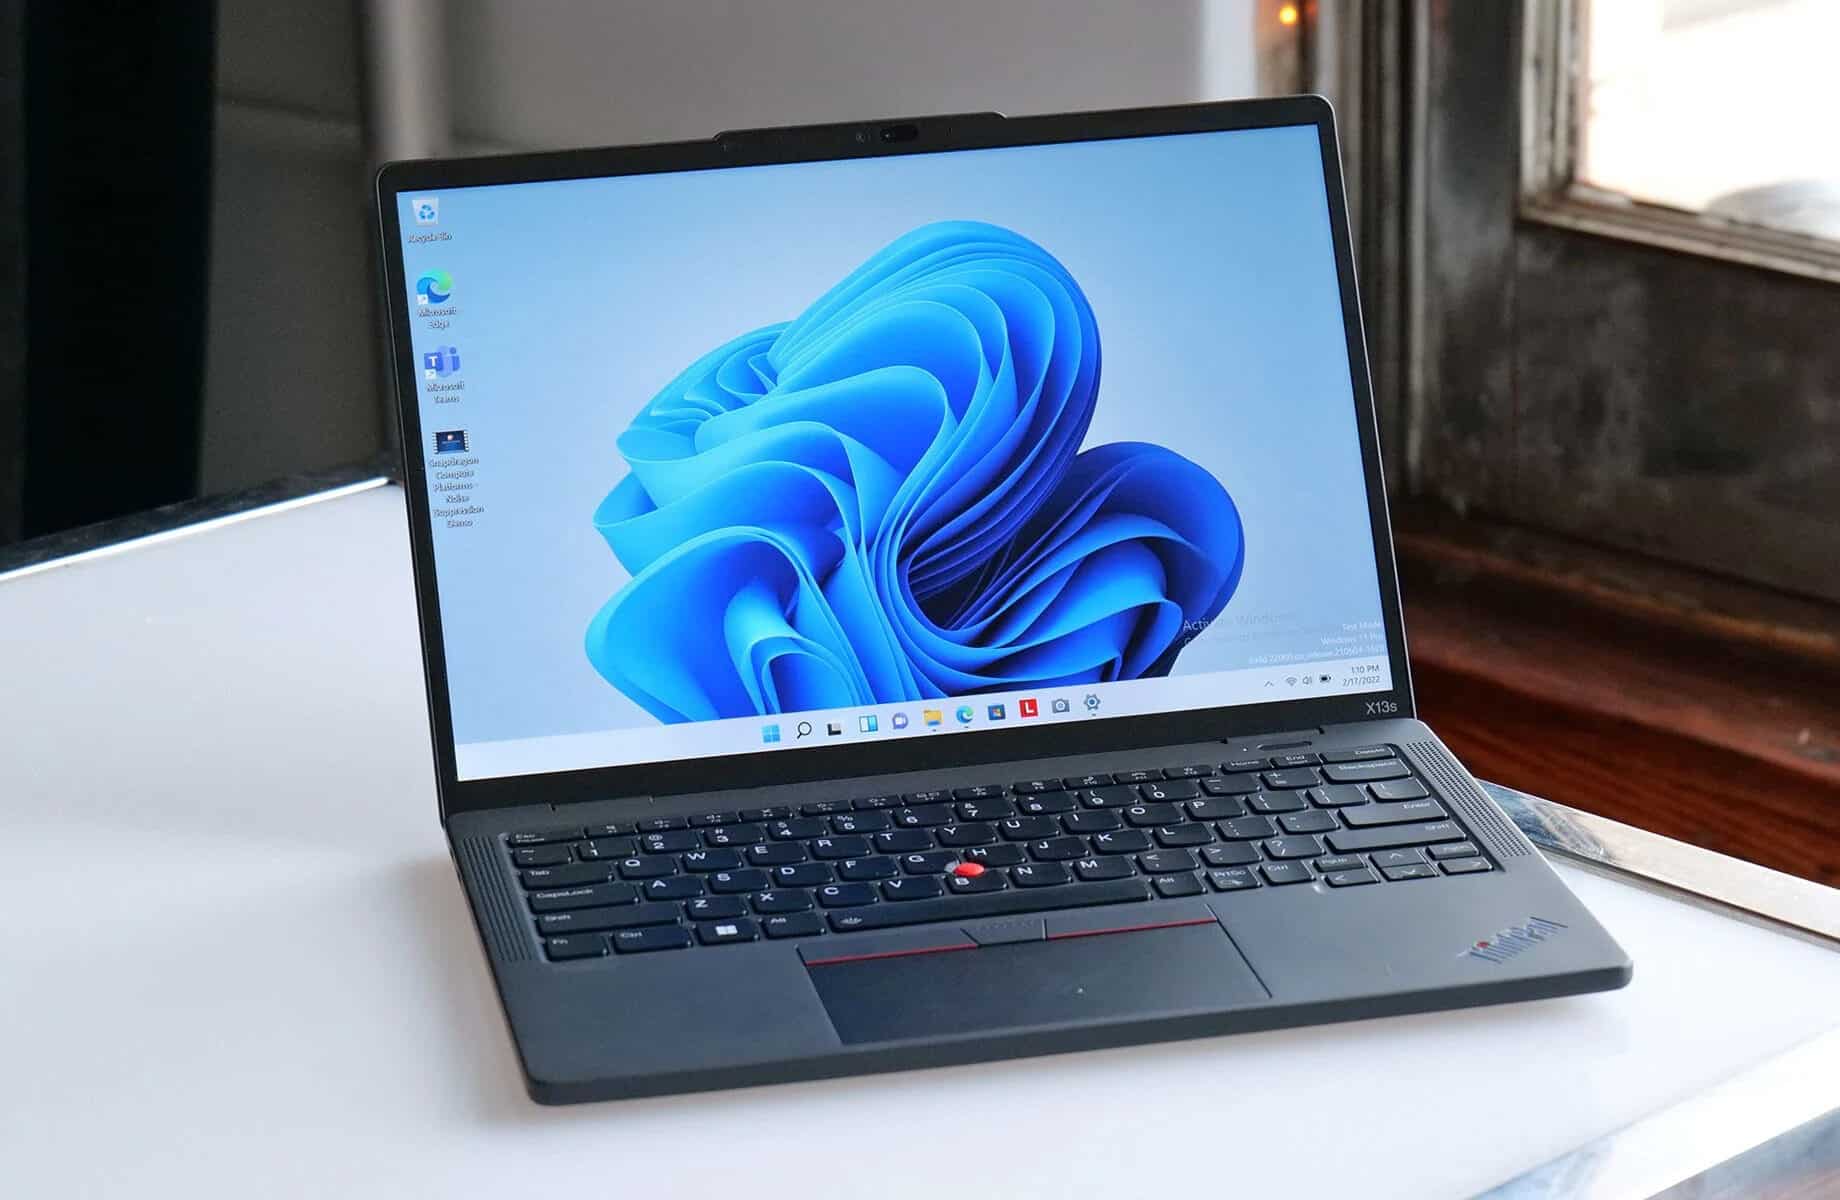 ThinkPad powered by a Snapdragon chip